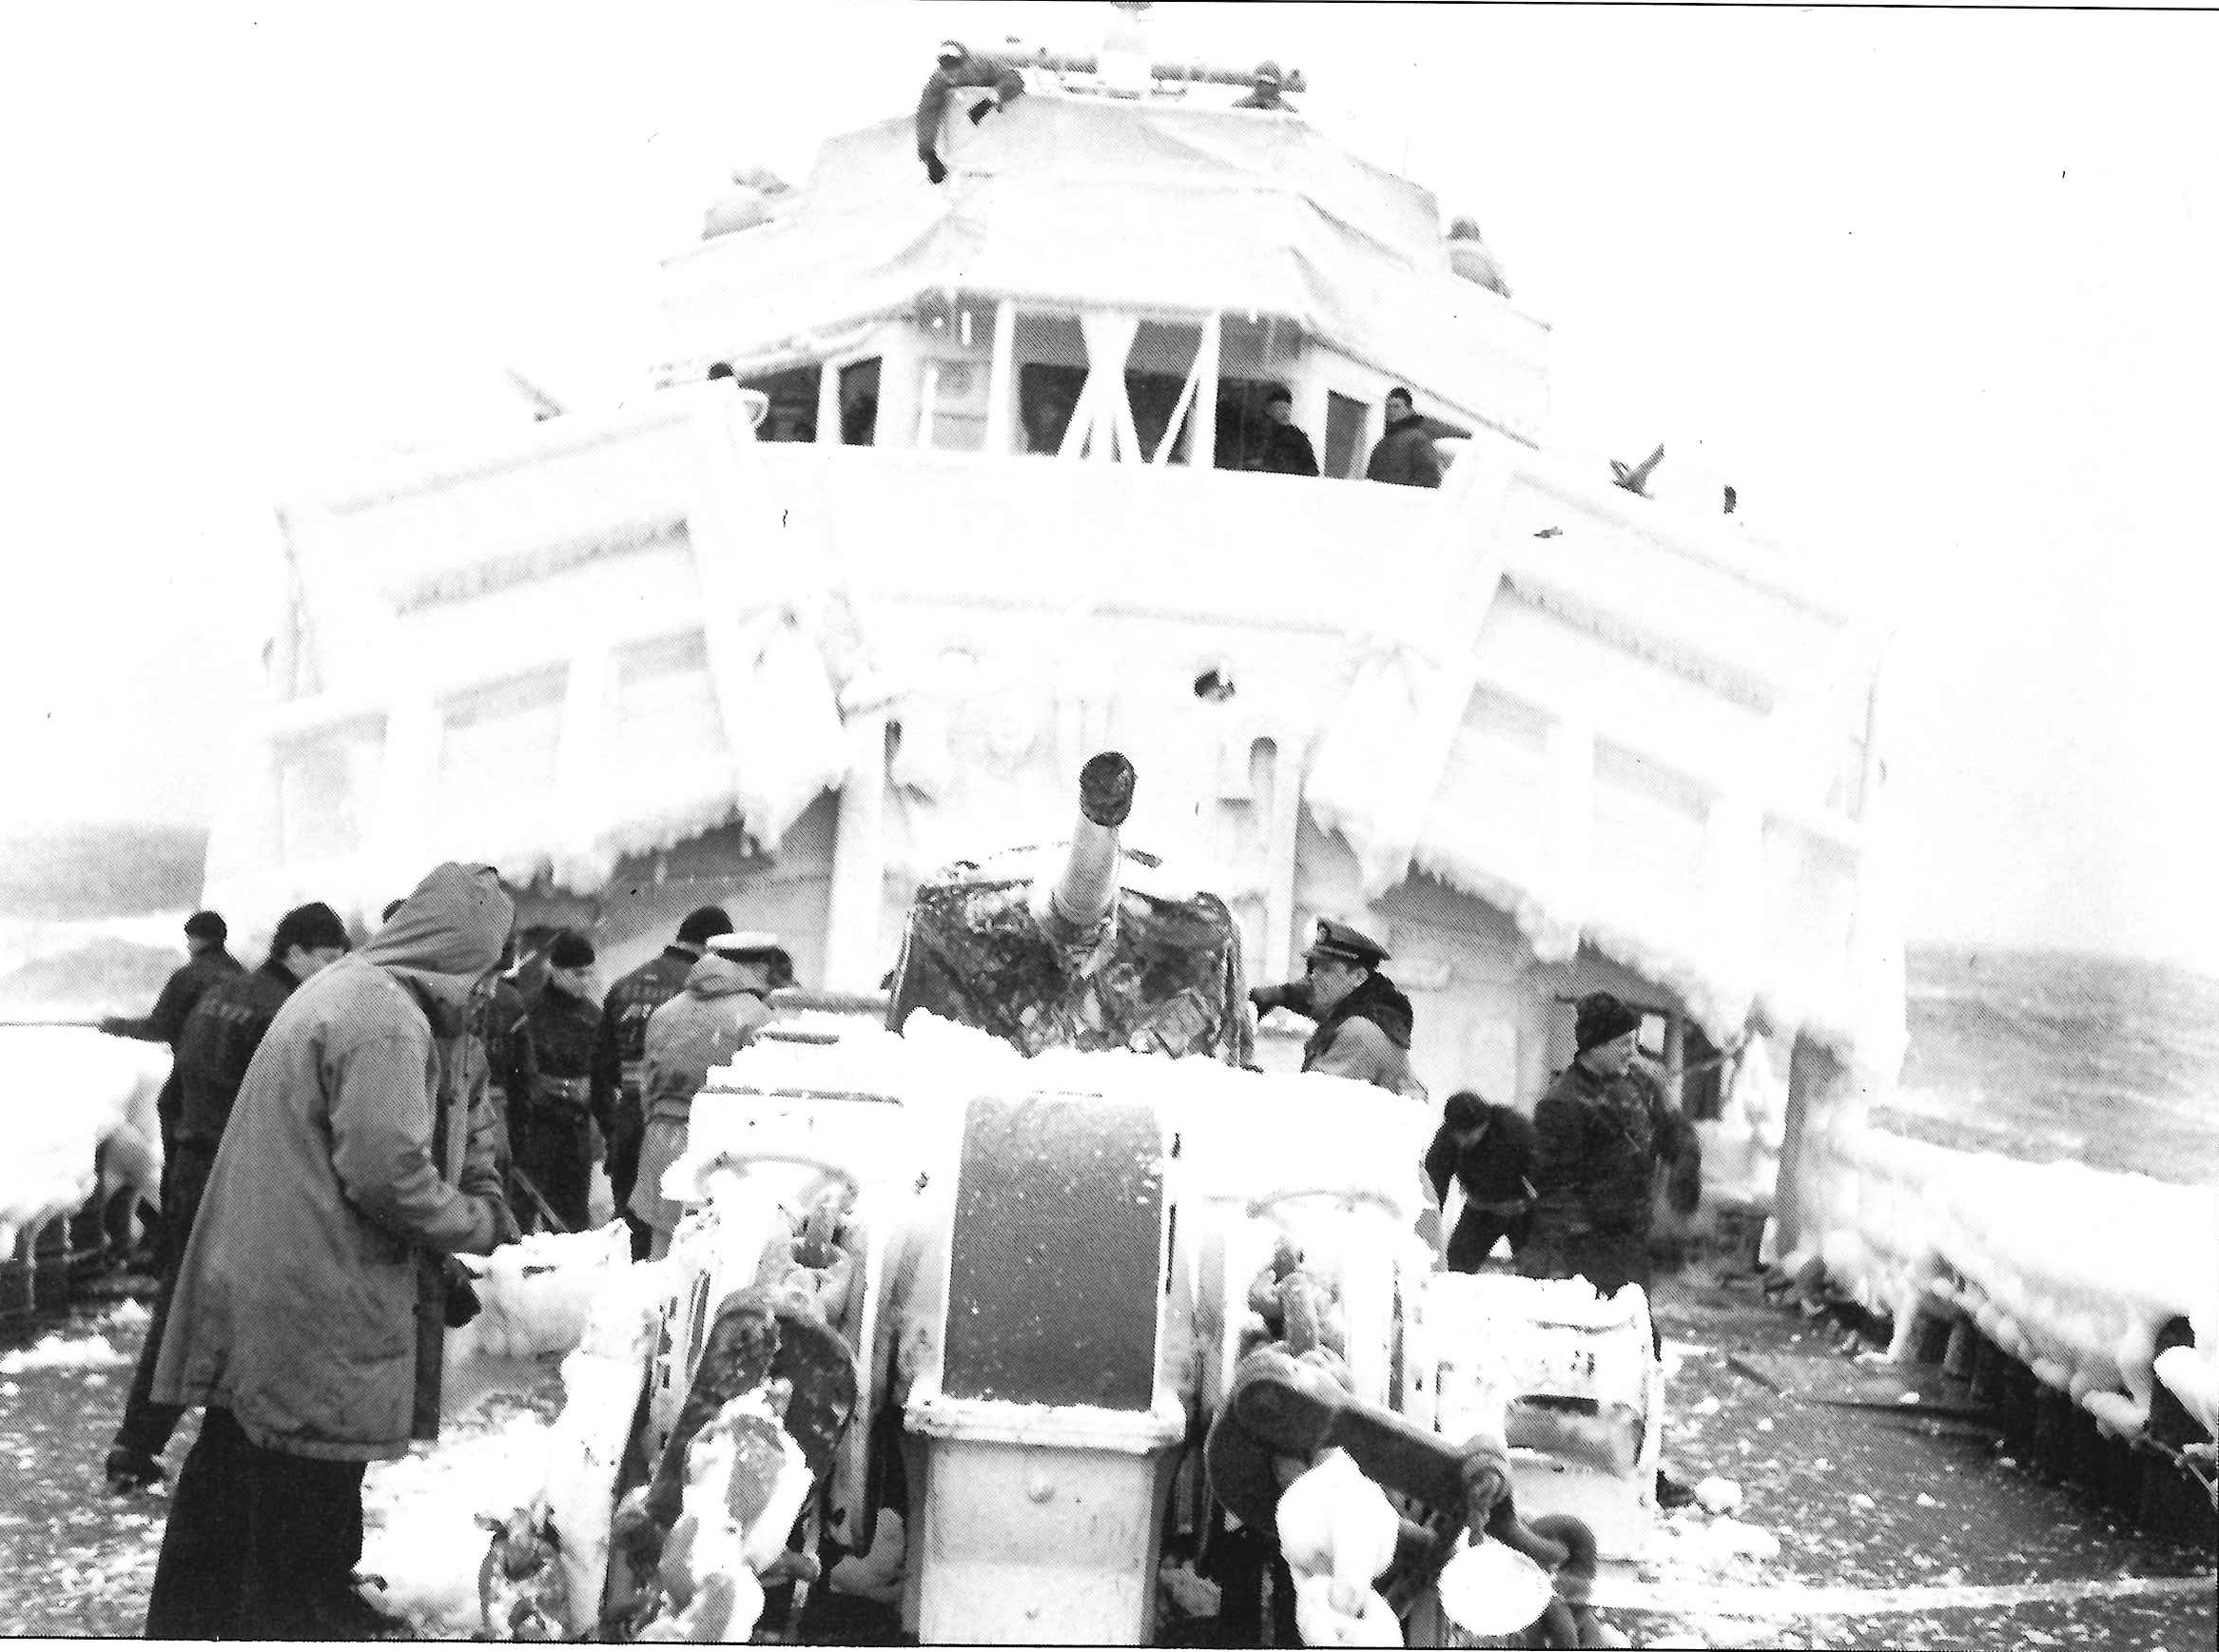 7.	Northland’s crew chipping ice. If allowed to accumulate the ice could make ships dangerously top-heavy. (U.S. Coast Guard)